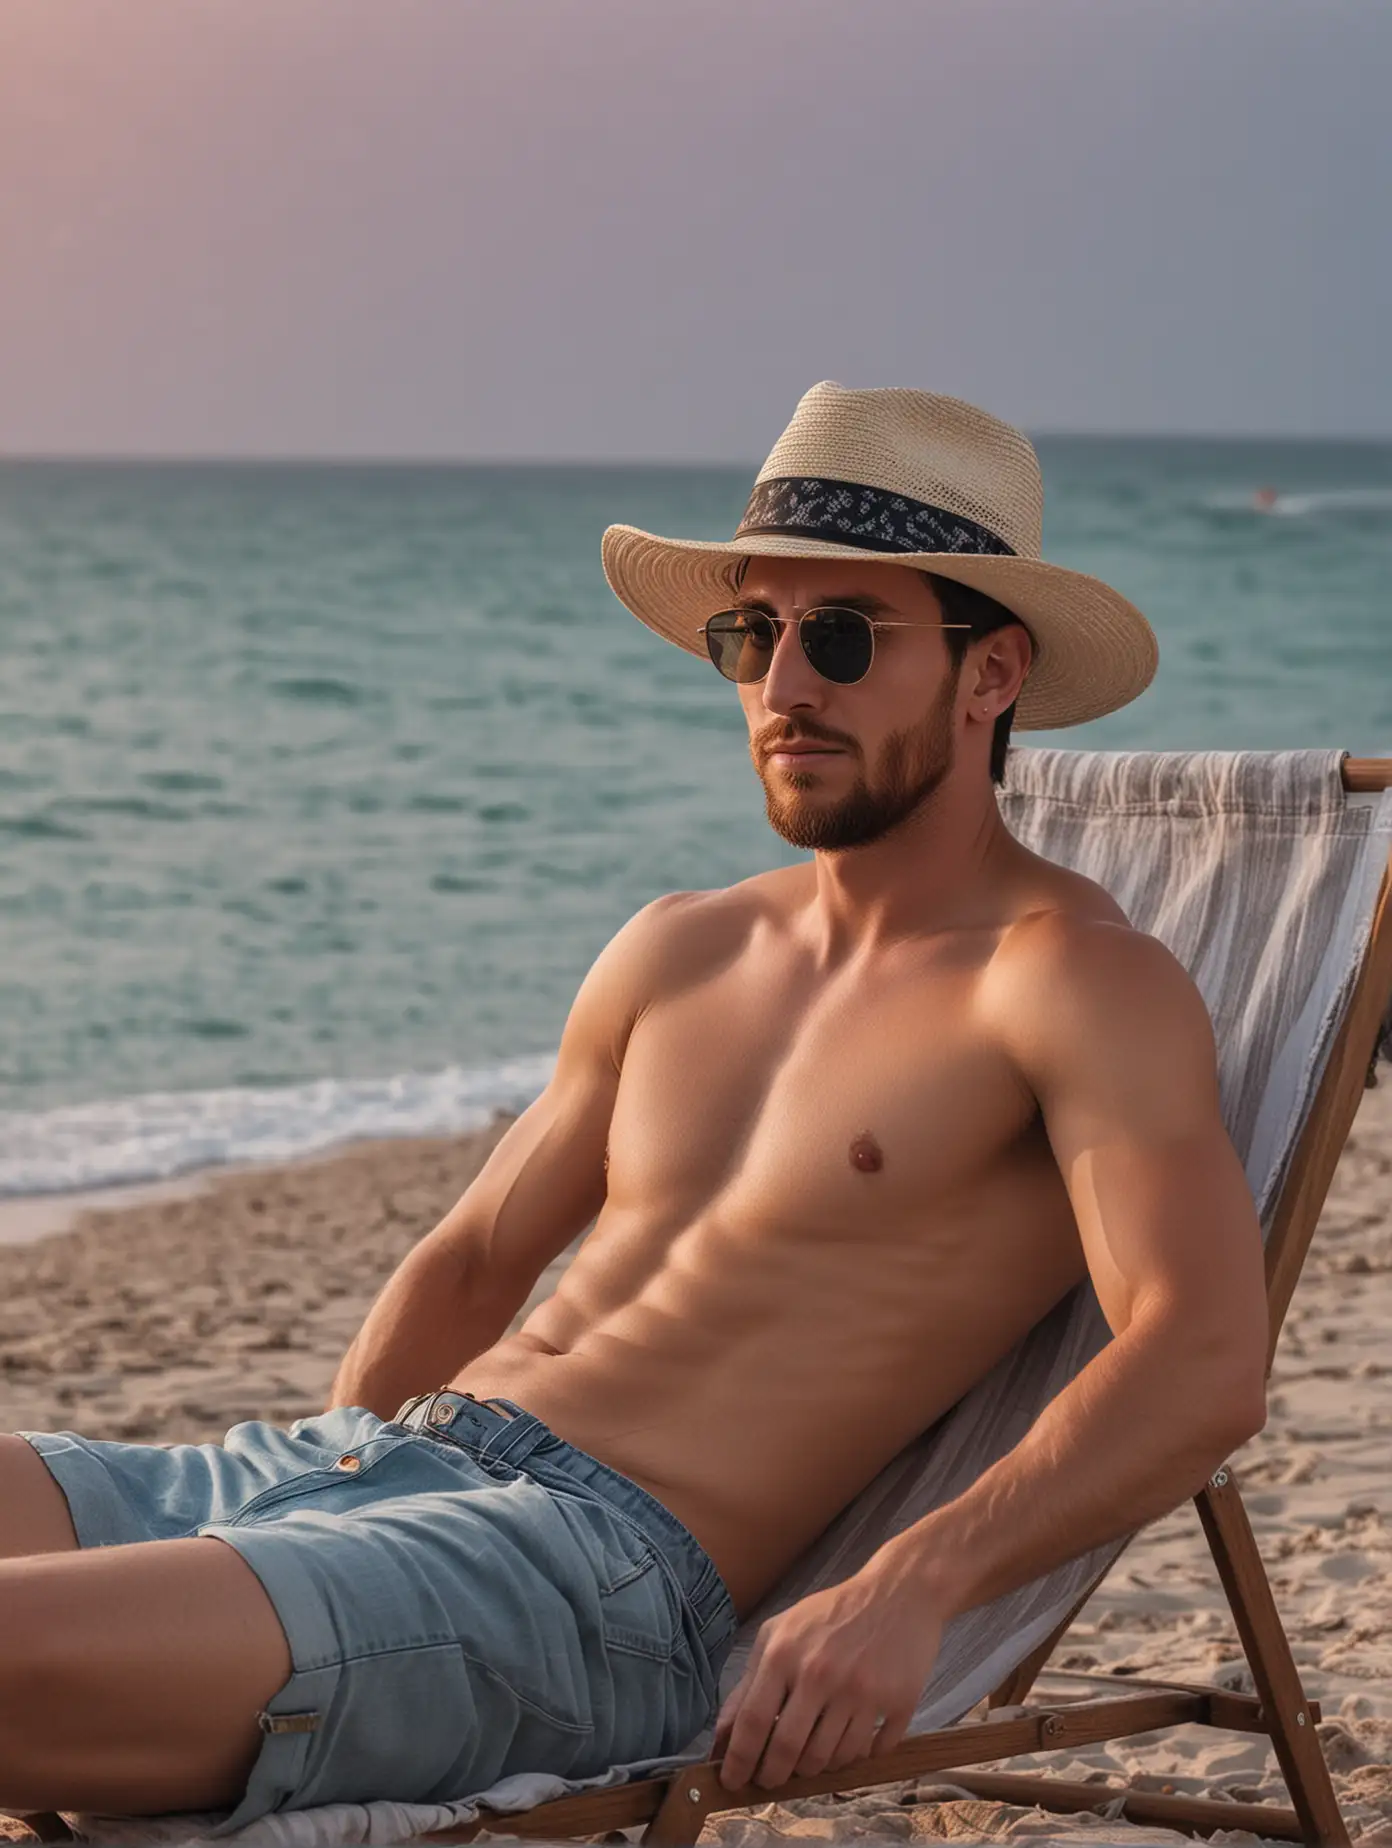 Leonel Messi Enjoying Sunset Beach Relaxation with Hat and Glasses